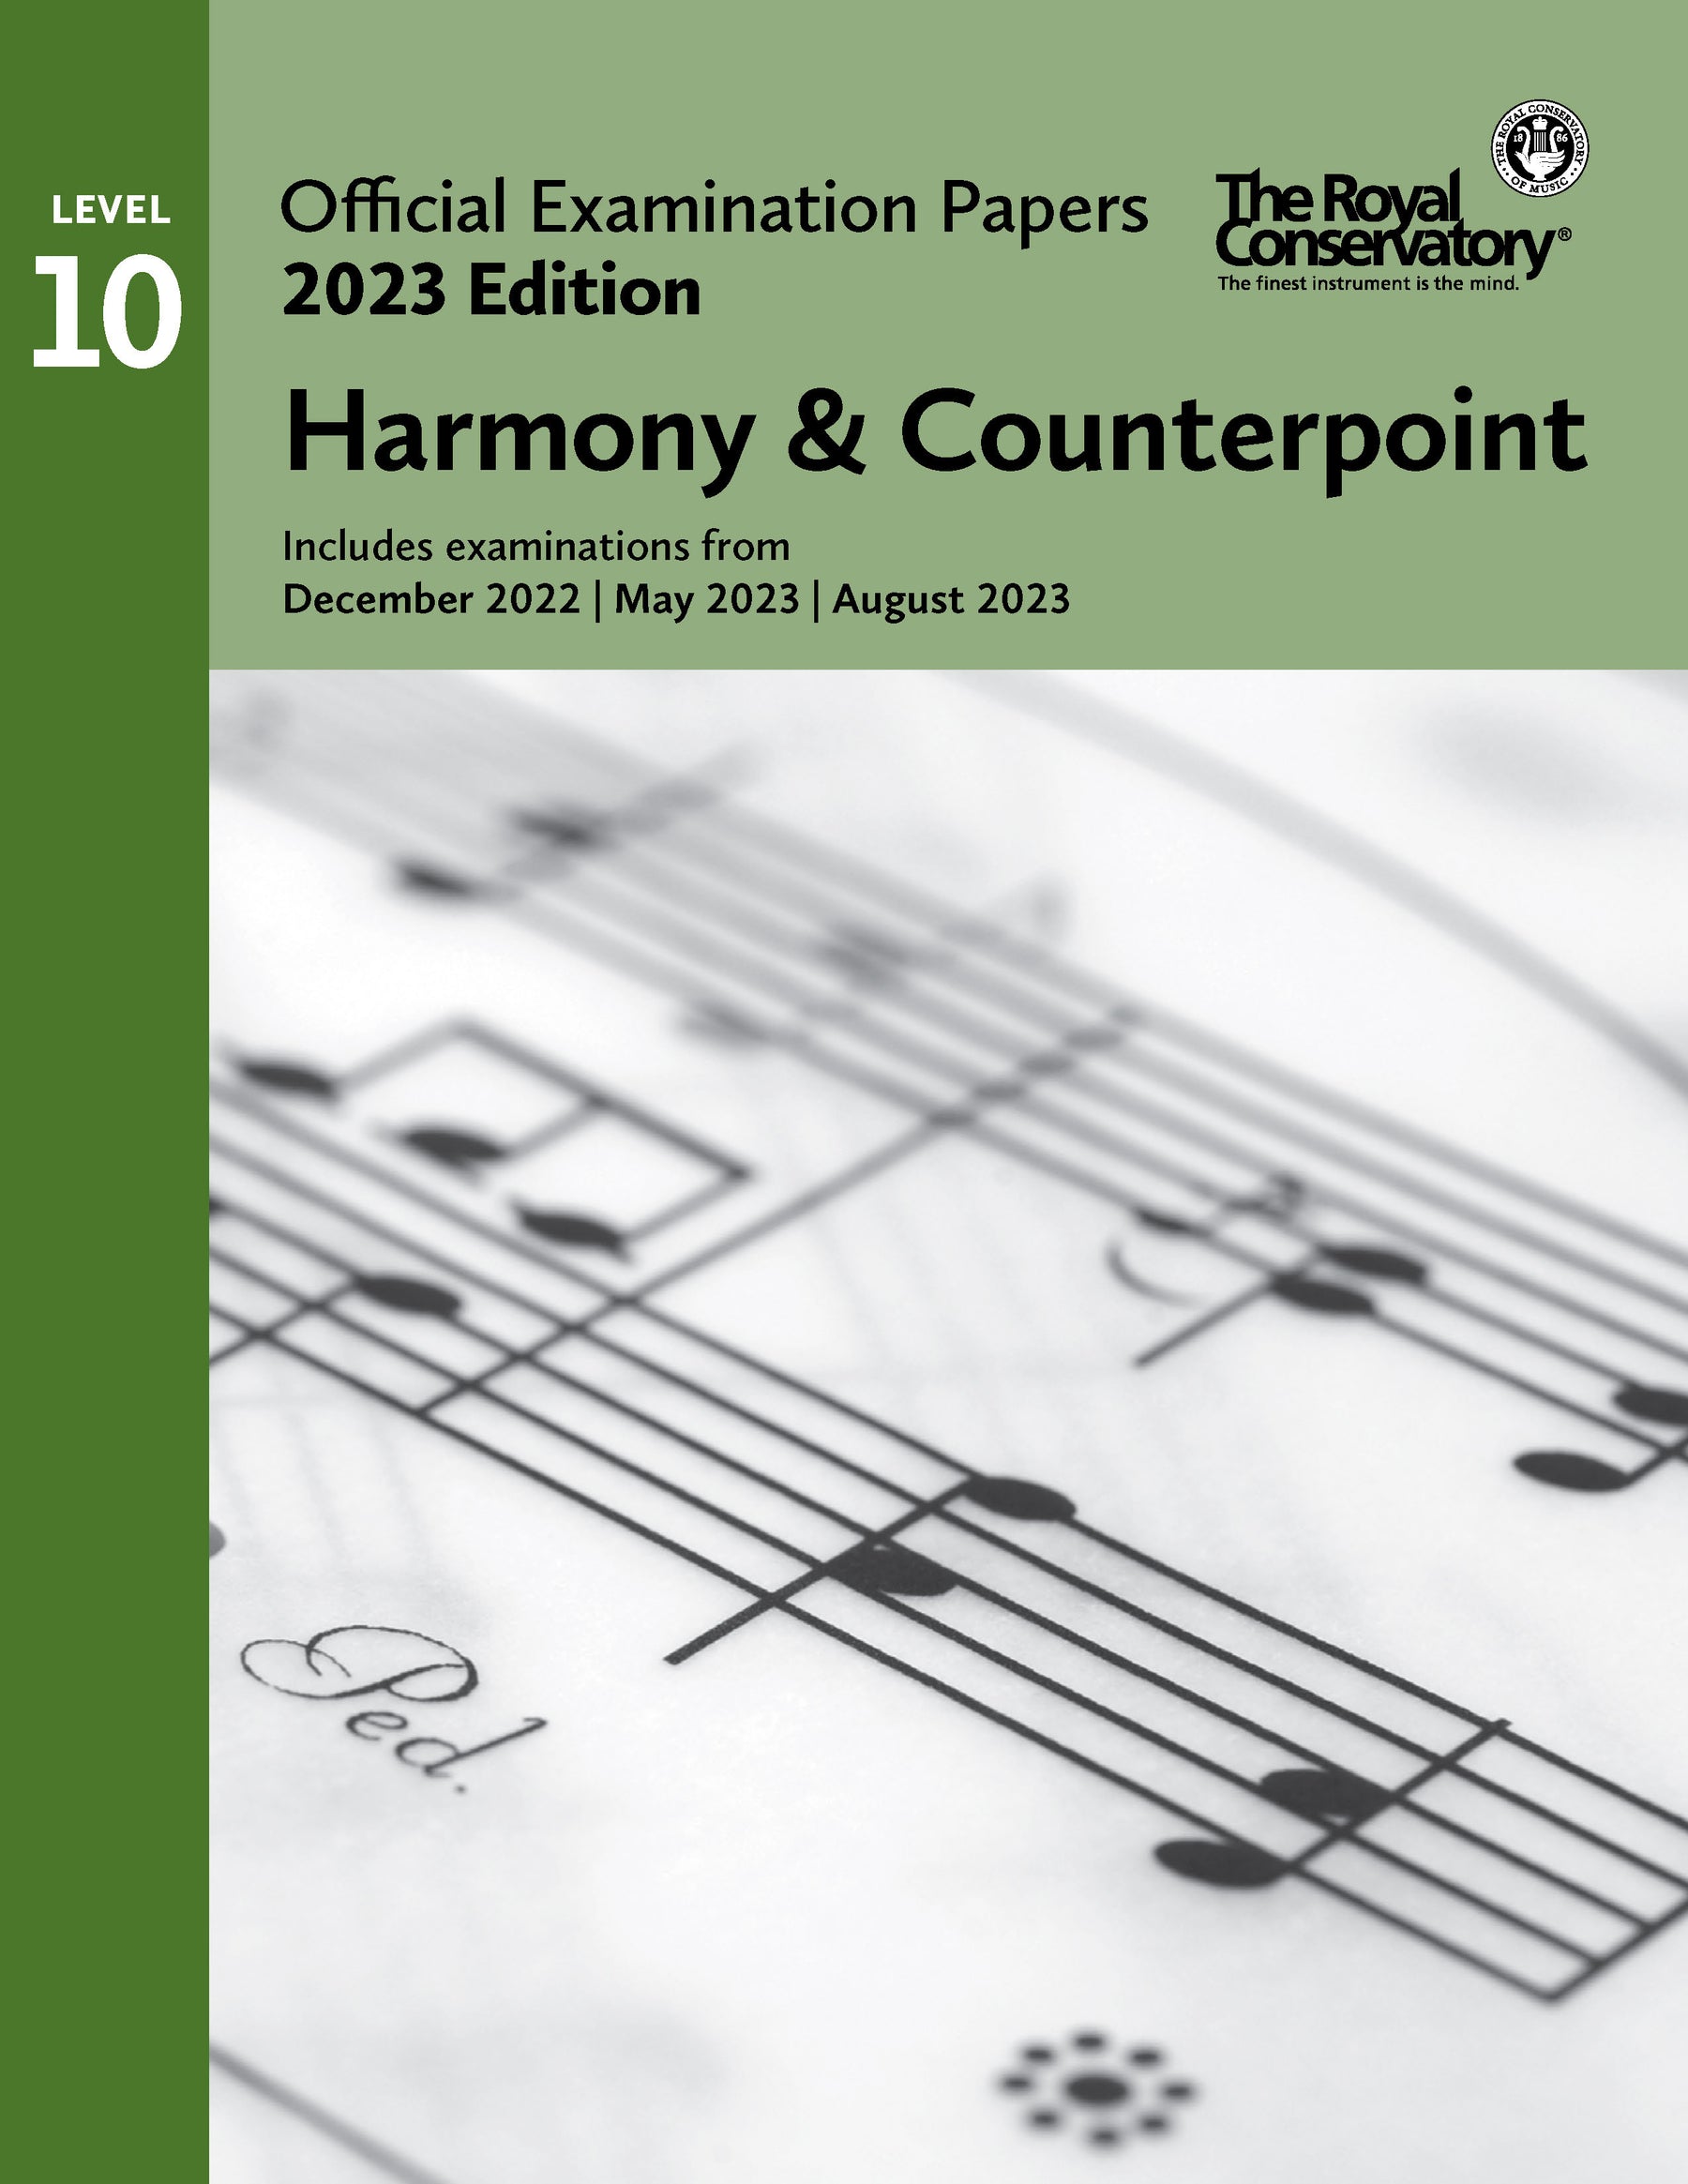 Offical Examination Papers Harmony & Counterpoint Level 10 (2023 Edition)